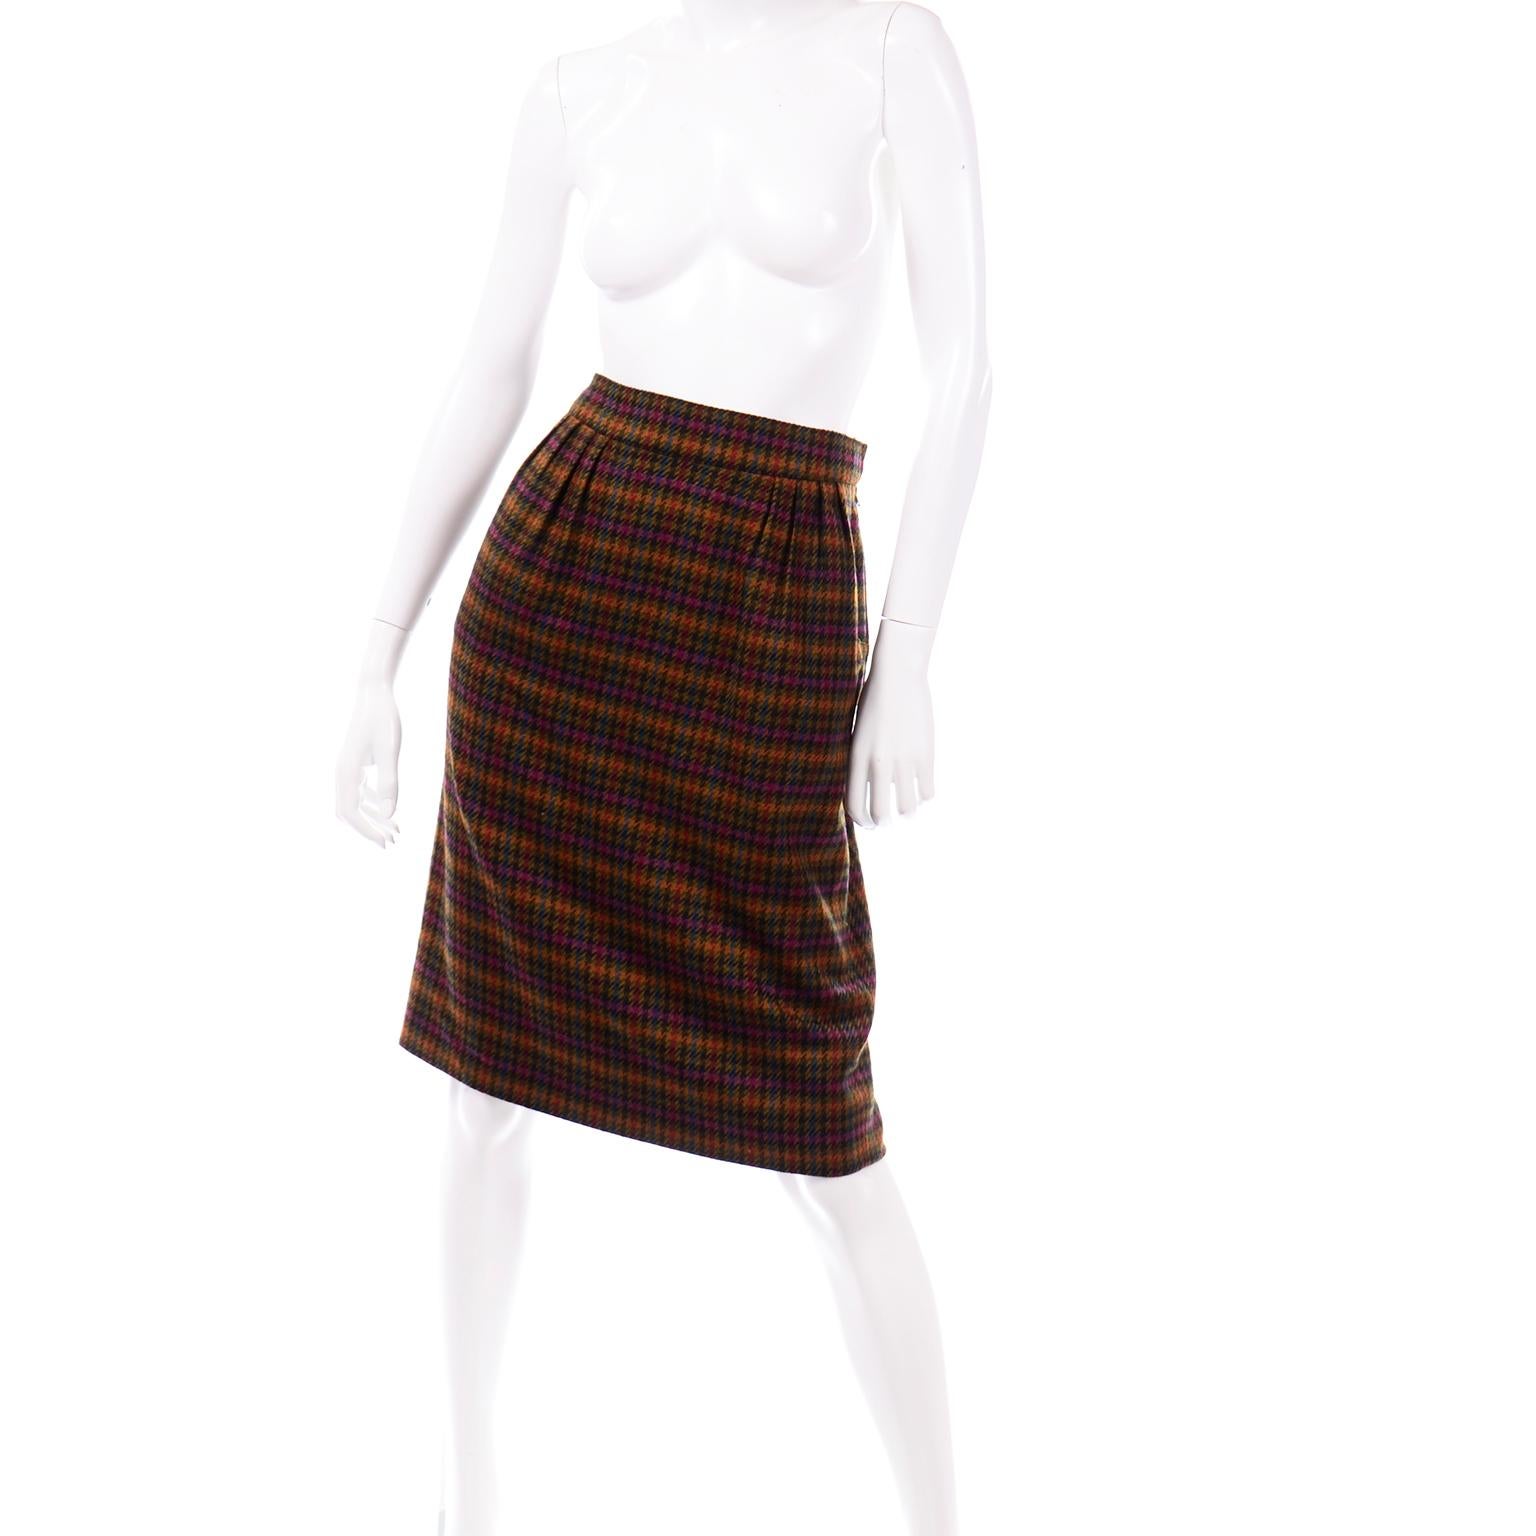 This fall/winter late 1970's Hermès houndstooth plaid wool skirt is in beautiful shades of olive green, navy, teal, magenta, orange, red, black, and brown. The bright colors in this houndstooth print are muted and understated, so they blend well